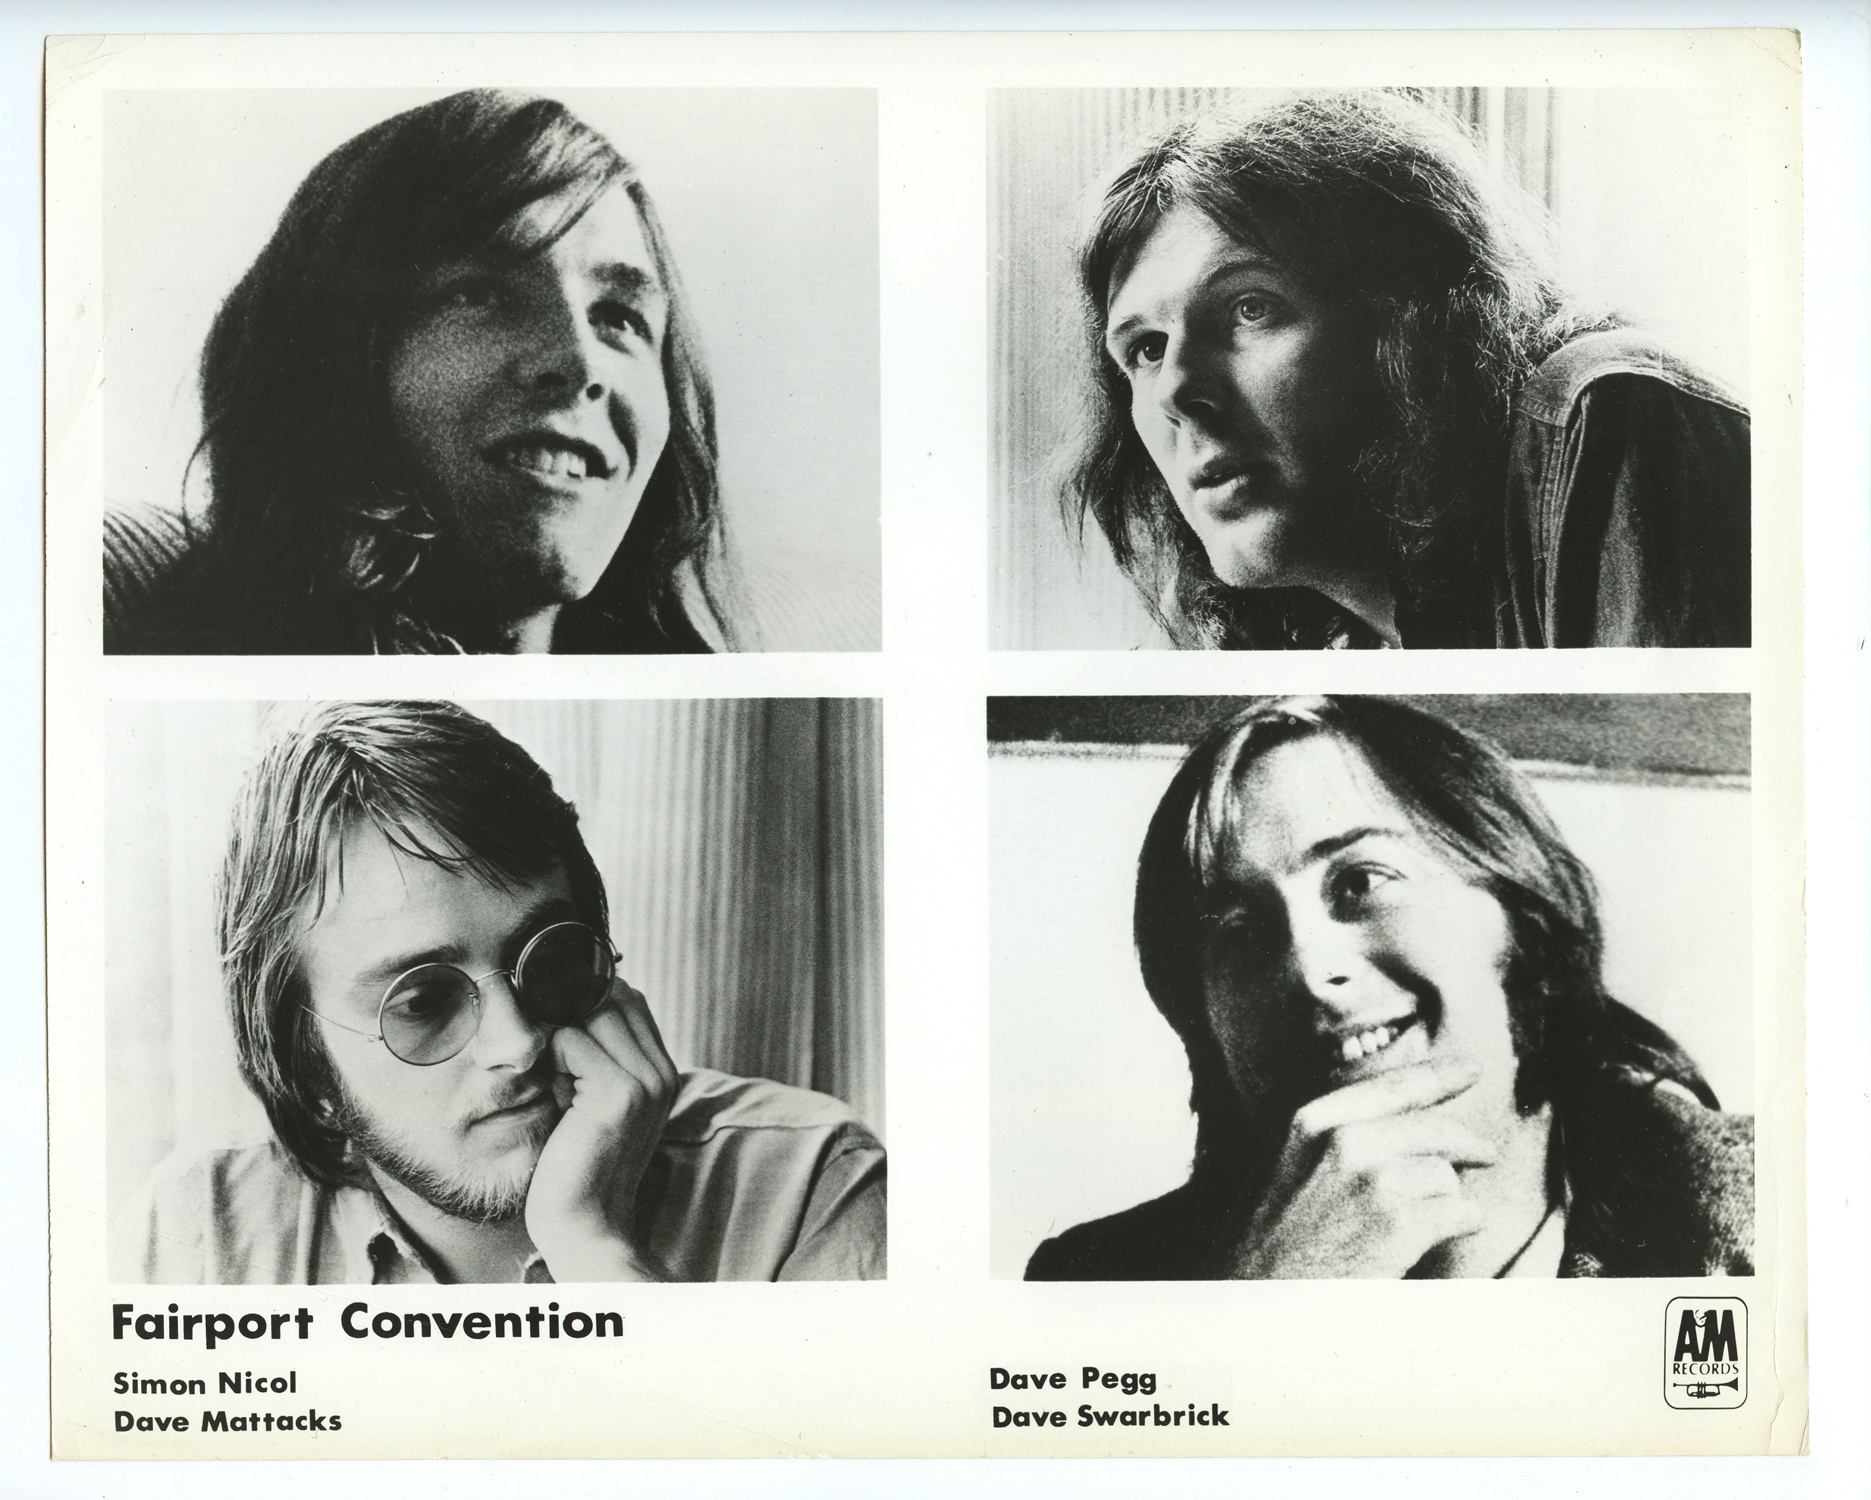 Fairport Convention Photo A&M Records